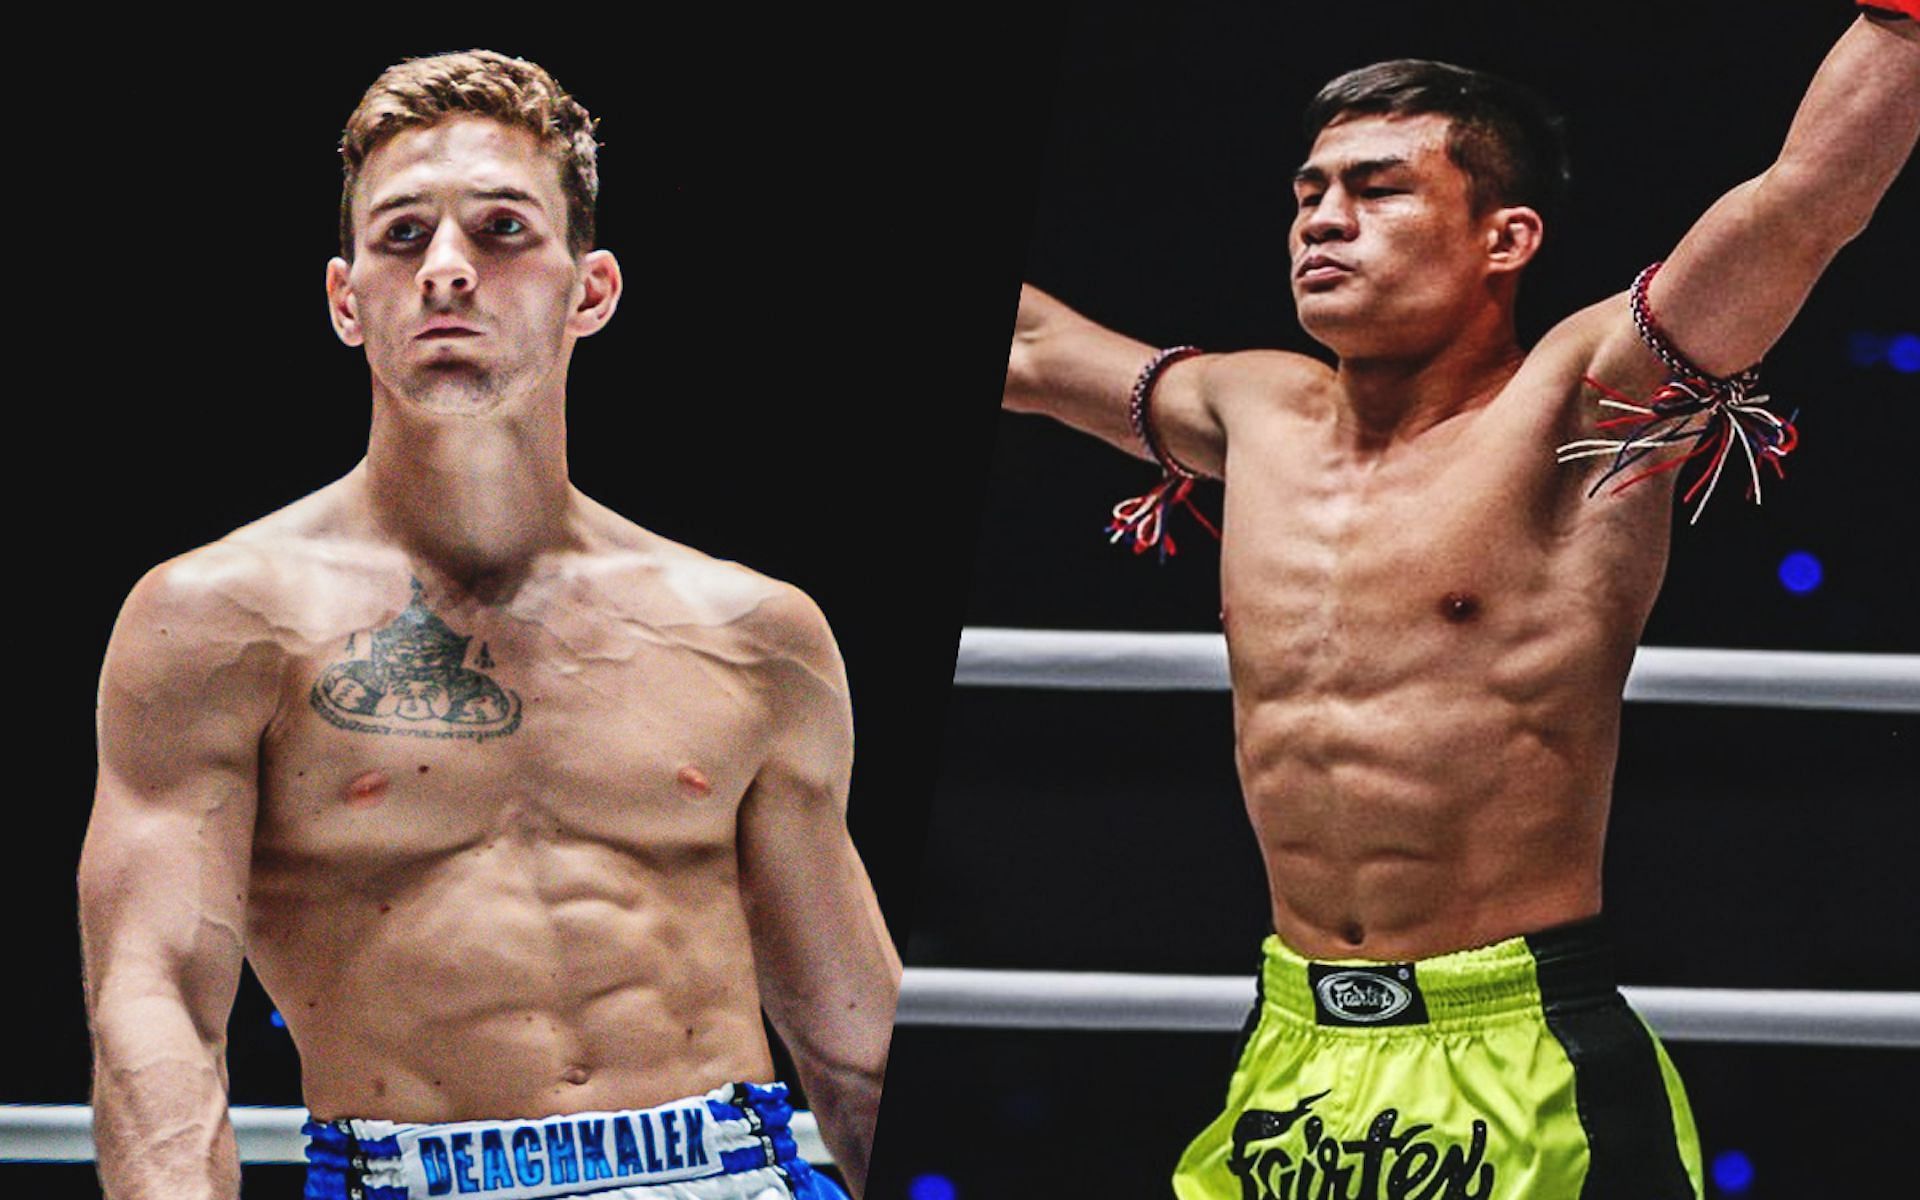 Top contender Nico Carrillo will face No. 4-ranked Saemapetch Fairtex in a crucial fight at ONE Fight Night 23.